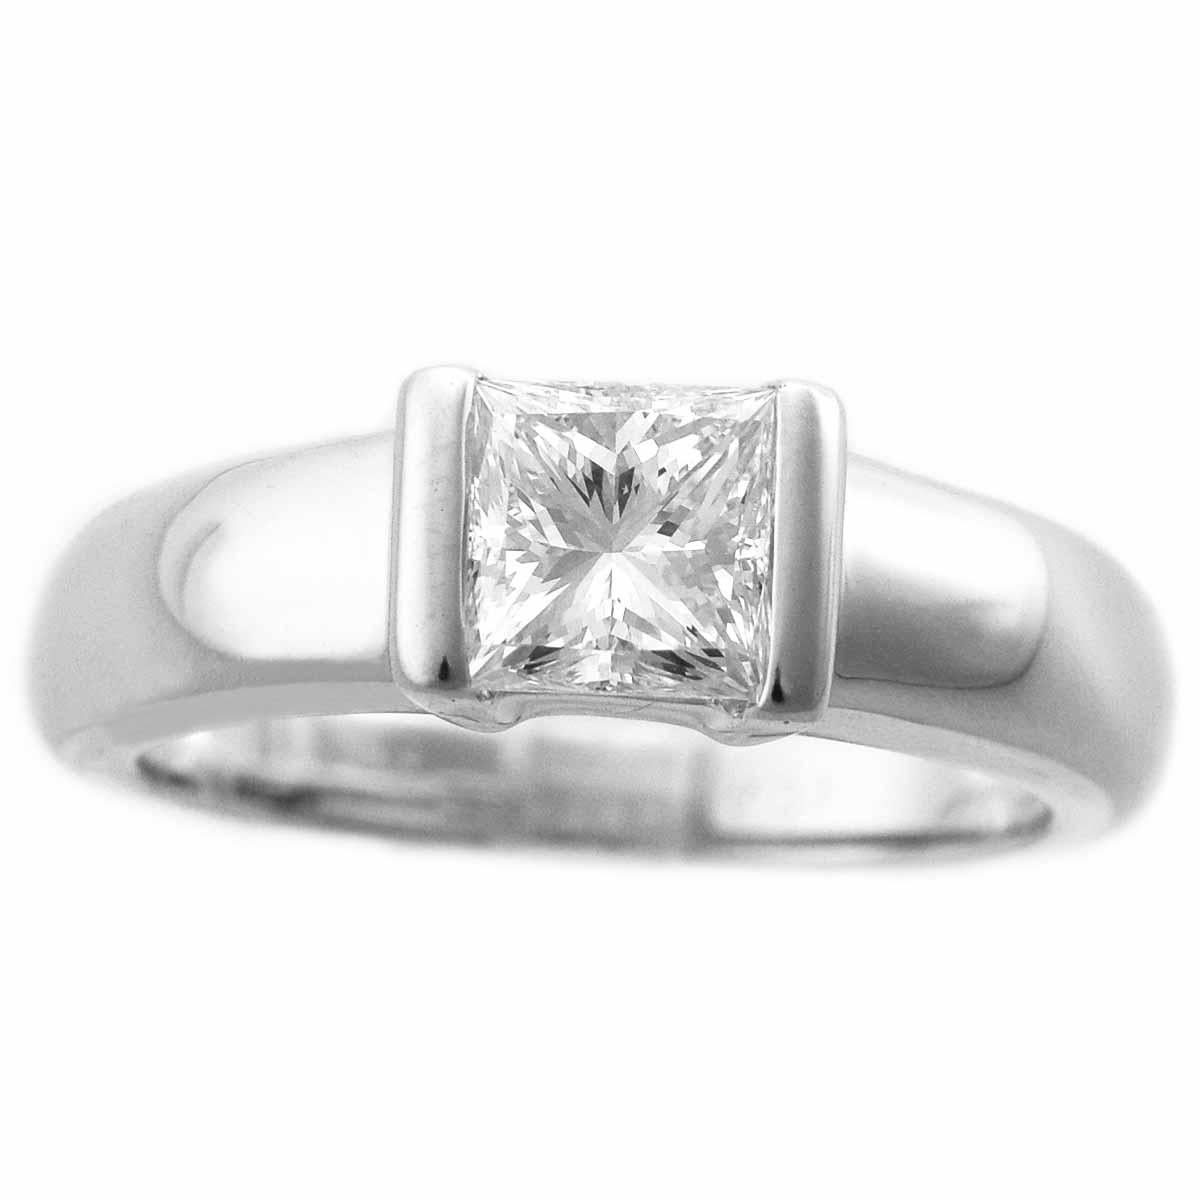 Brand:Van Cleef&Arpels
Name:Diamond Solitaire ring
Material:1P diamond (1.04ct D-VVS2), 750 K18 WG white gold
Weight:6.2g（Approx)
Ring size:British & Australian:M  /   US & Canada:6 /  French & Russian:52 /  German:16 1/2 /  Japanese:  12 /Swiss: 12